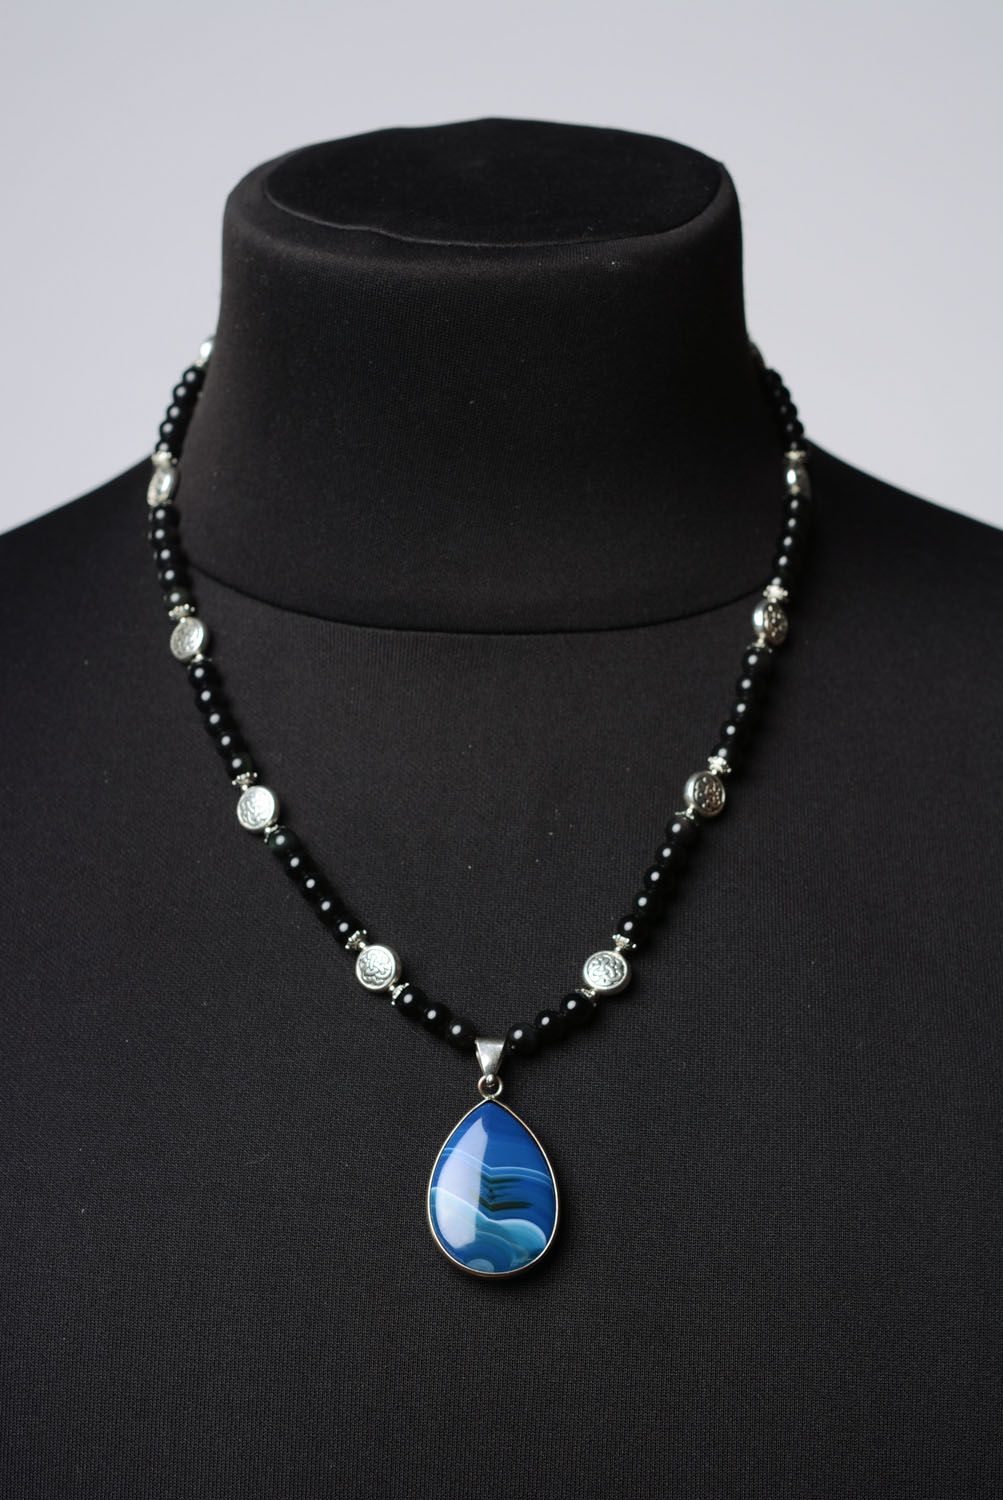 Designer necklace made of agate photo 2